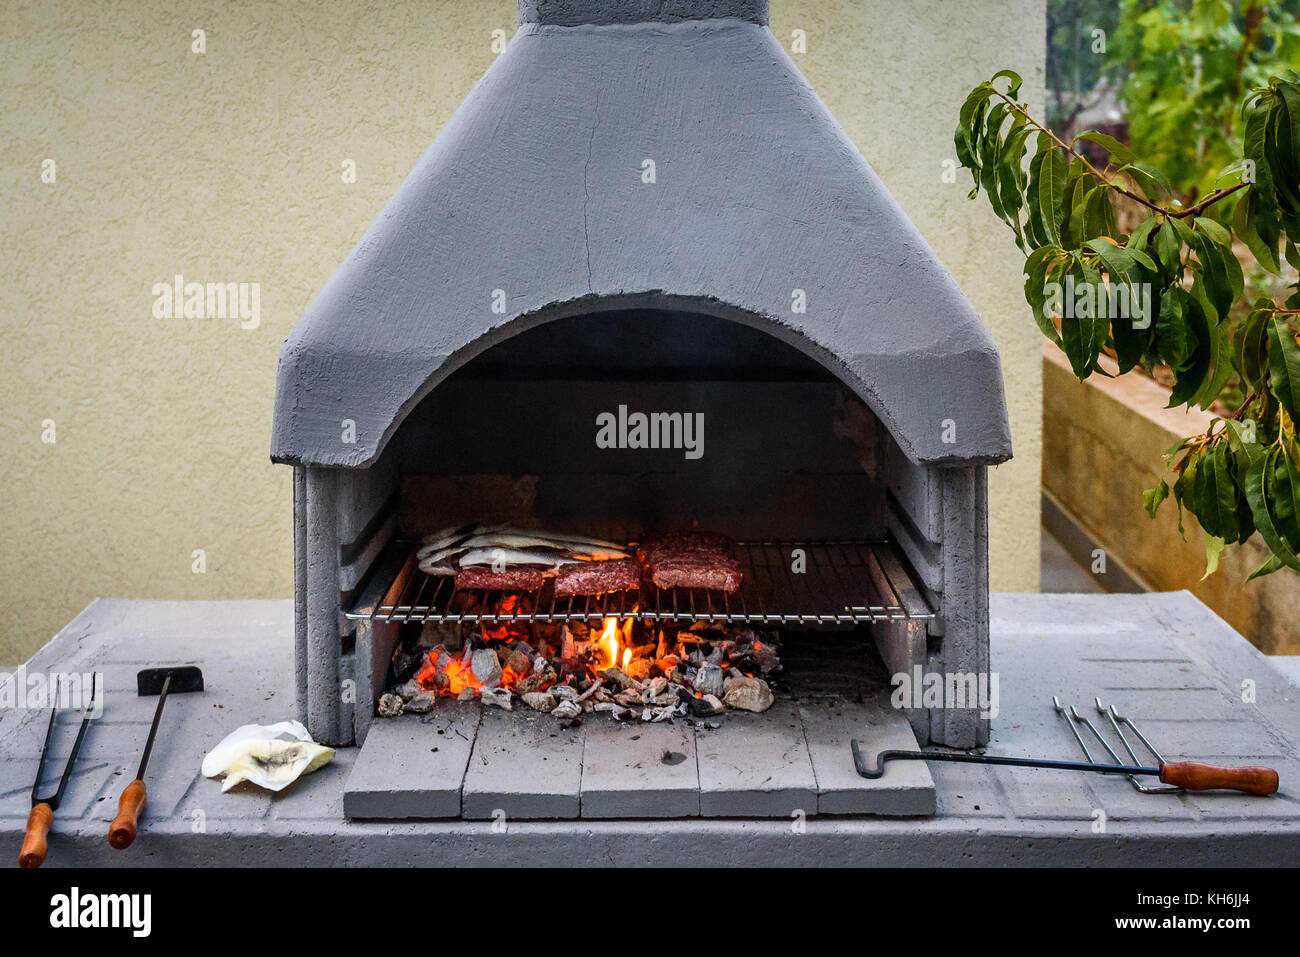 Built In Barbecue High Resolution Stock Photography and Images - Alamy